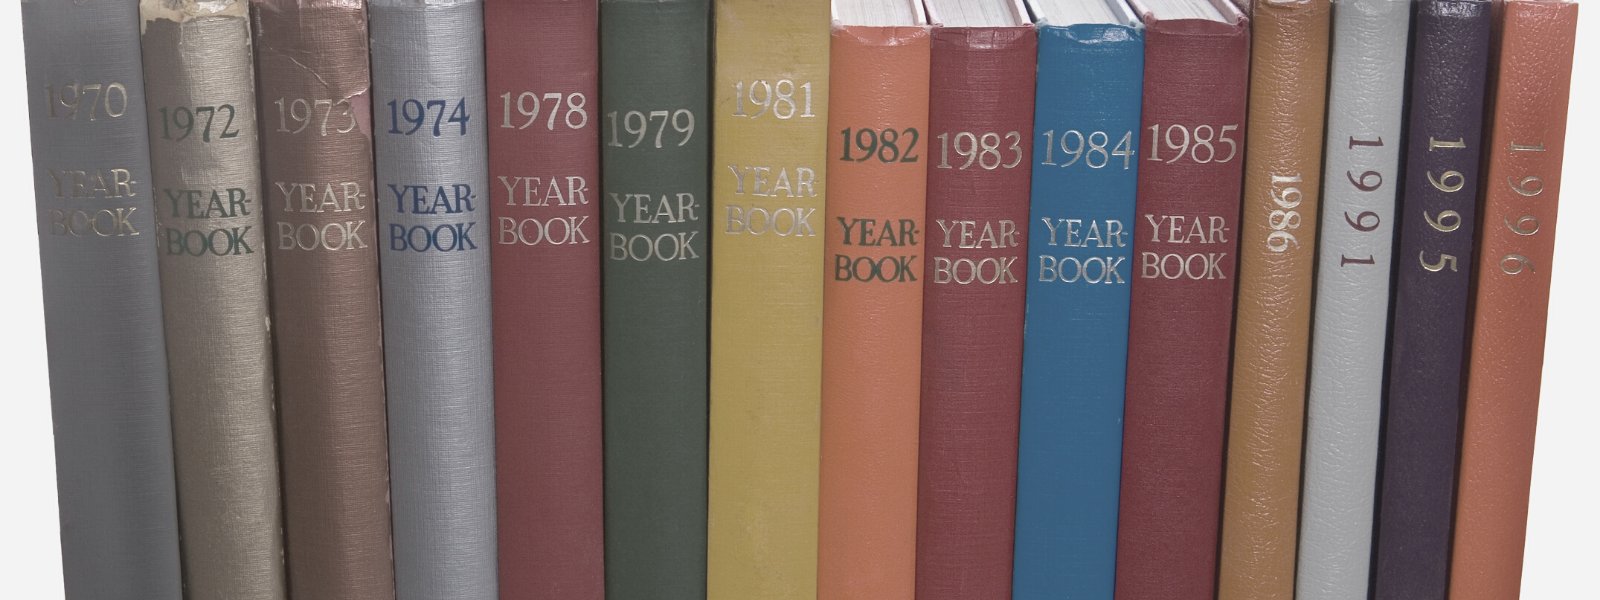 vintage yearbook collection-reading vintage an online vintage bookseller